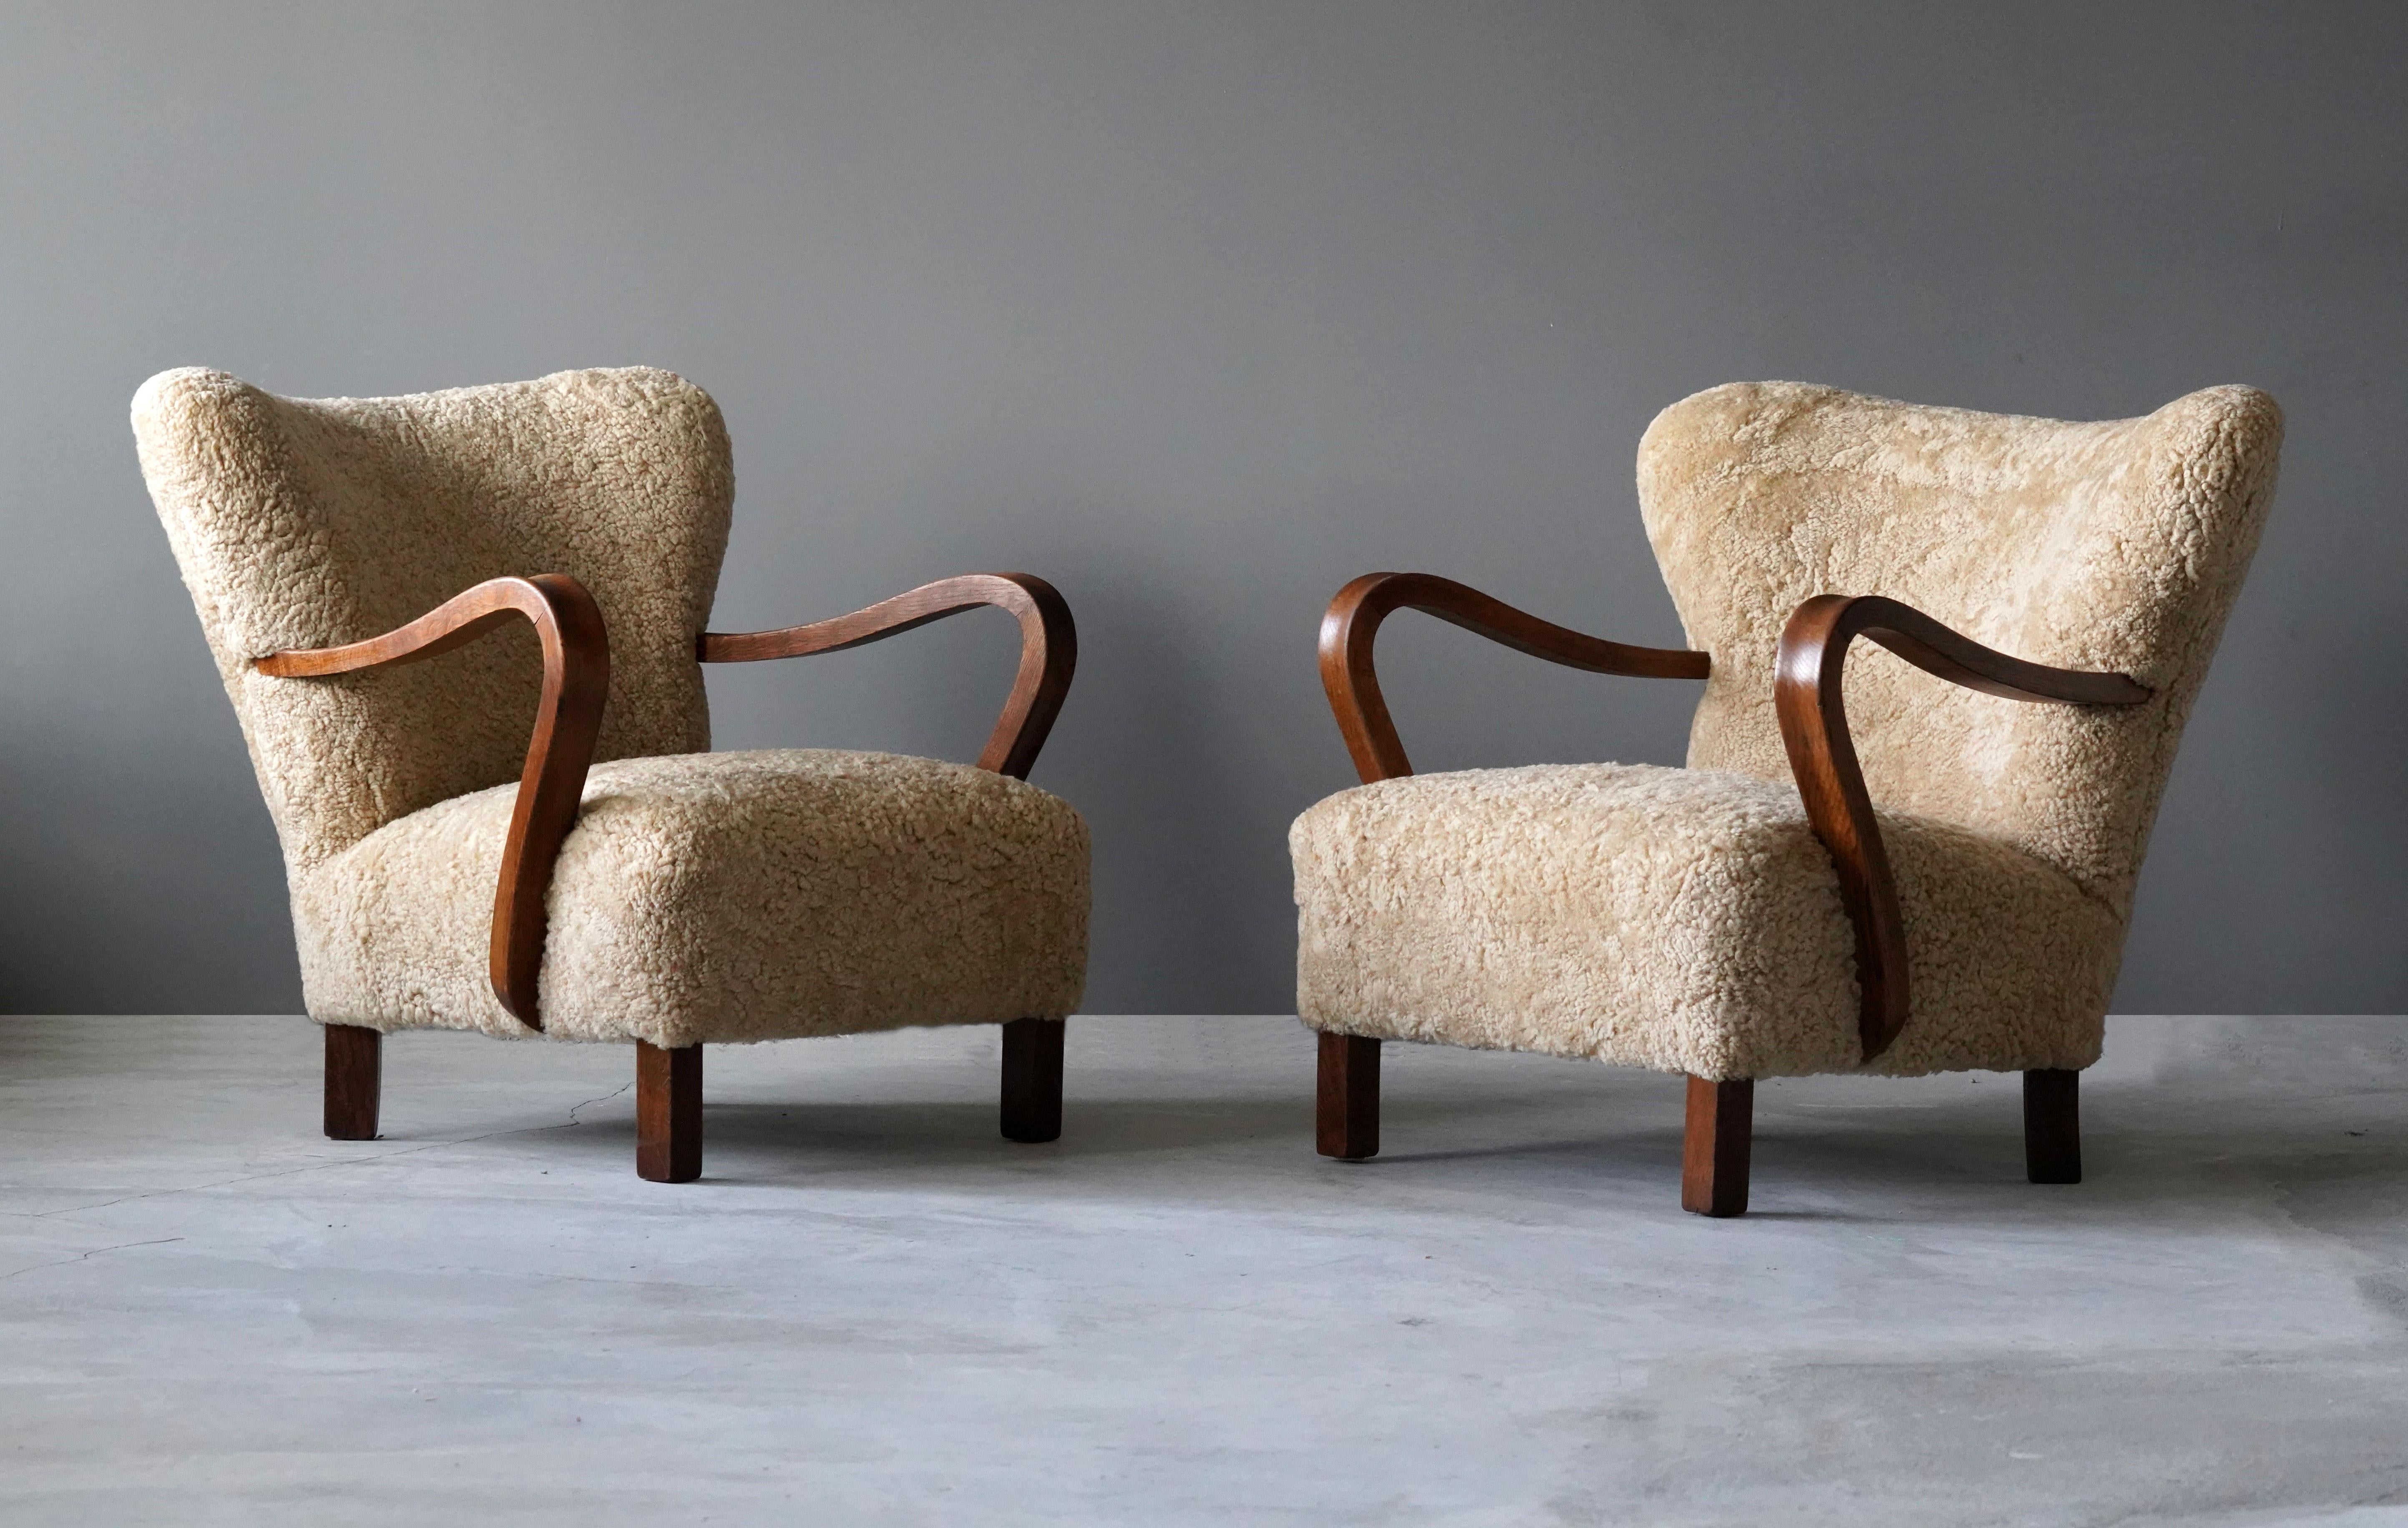 A pair of organic modernist lounge chairs. Designed and produced in Denmark, 1940s. Reupholstered in brand new authentic shearling upholstery. 

Similar in style to works by designers such as Flemming Lassen, Gio Ponti, Vladimir Kagan, Philip